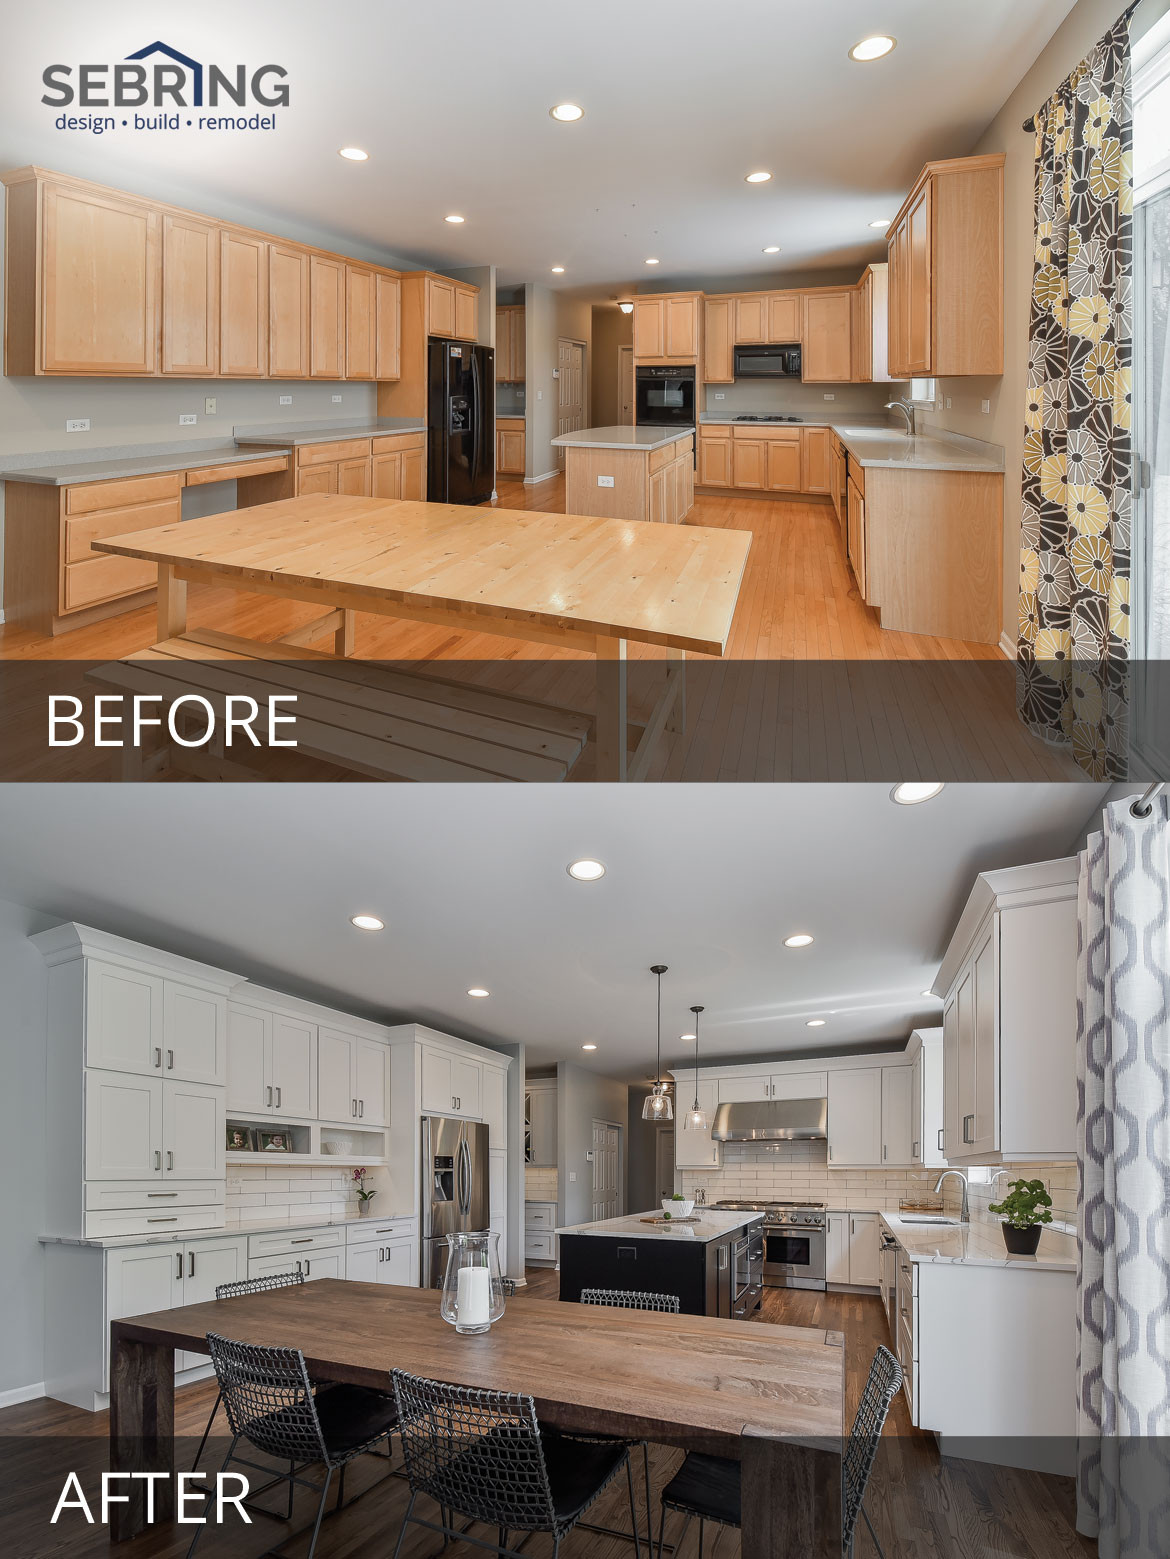 Remodeling Kitchen Before And After
 Pete & Mary s Kitchen Before & After